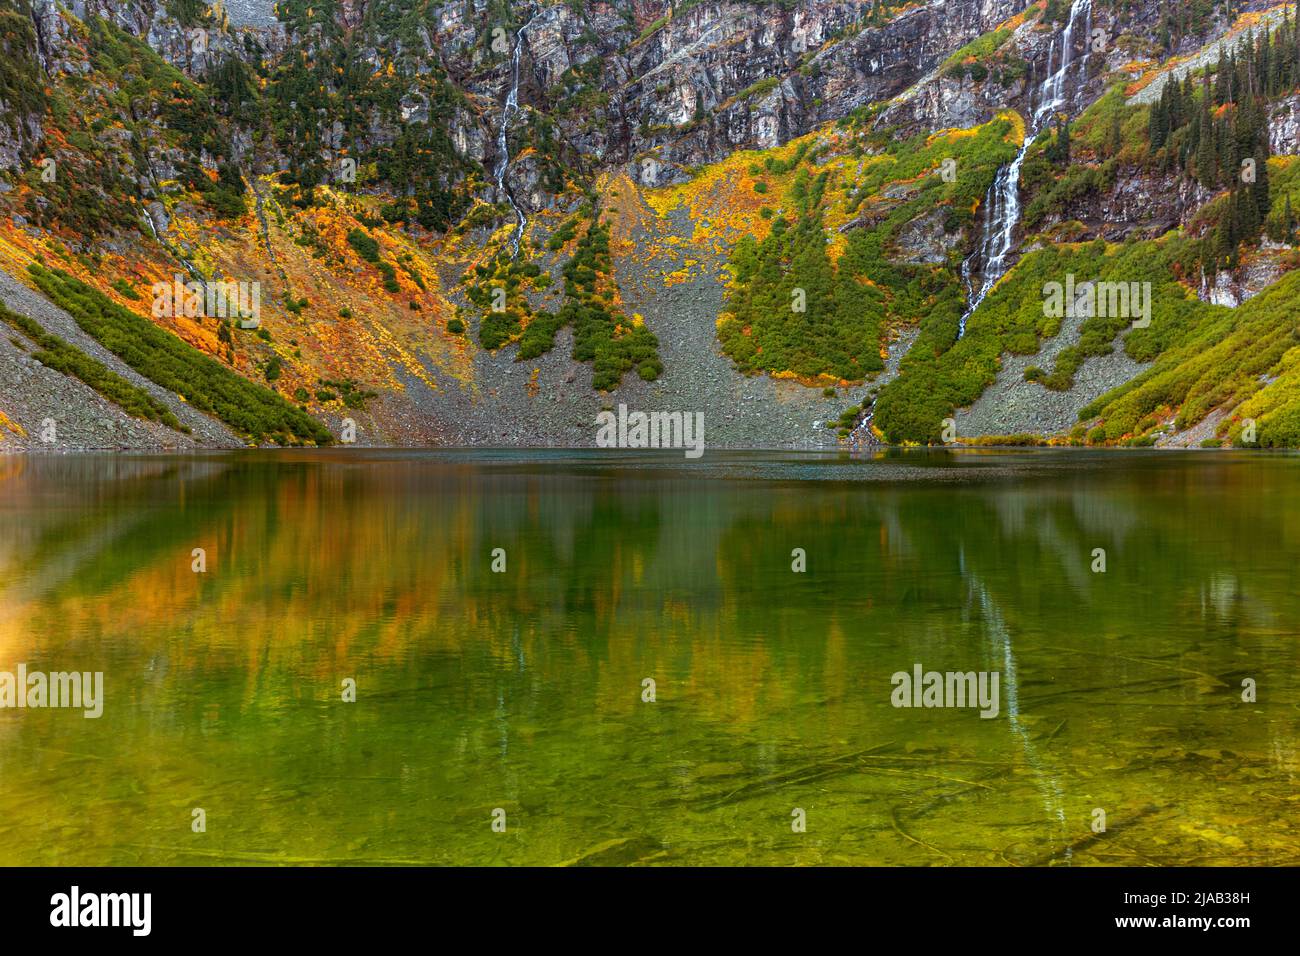 WA21624-00...WASHINGTON - Fall time at Rainy Lake in the North Cascades section of the Okanogan -Wenatchee National Forest. Stock Photo